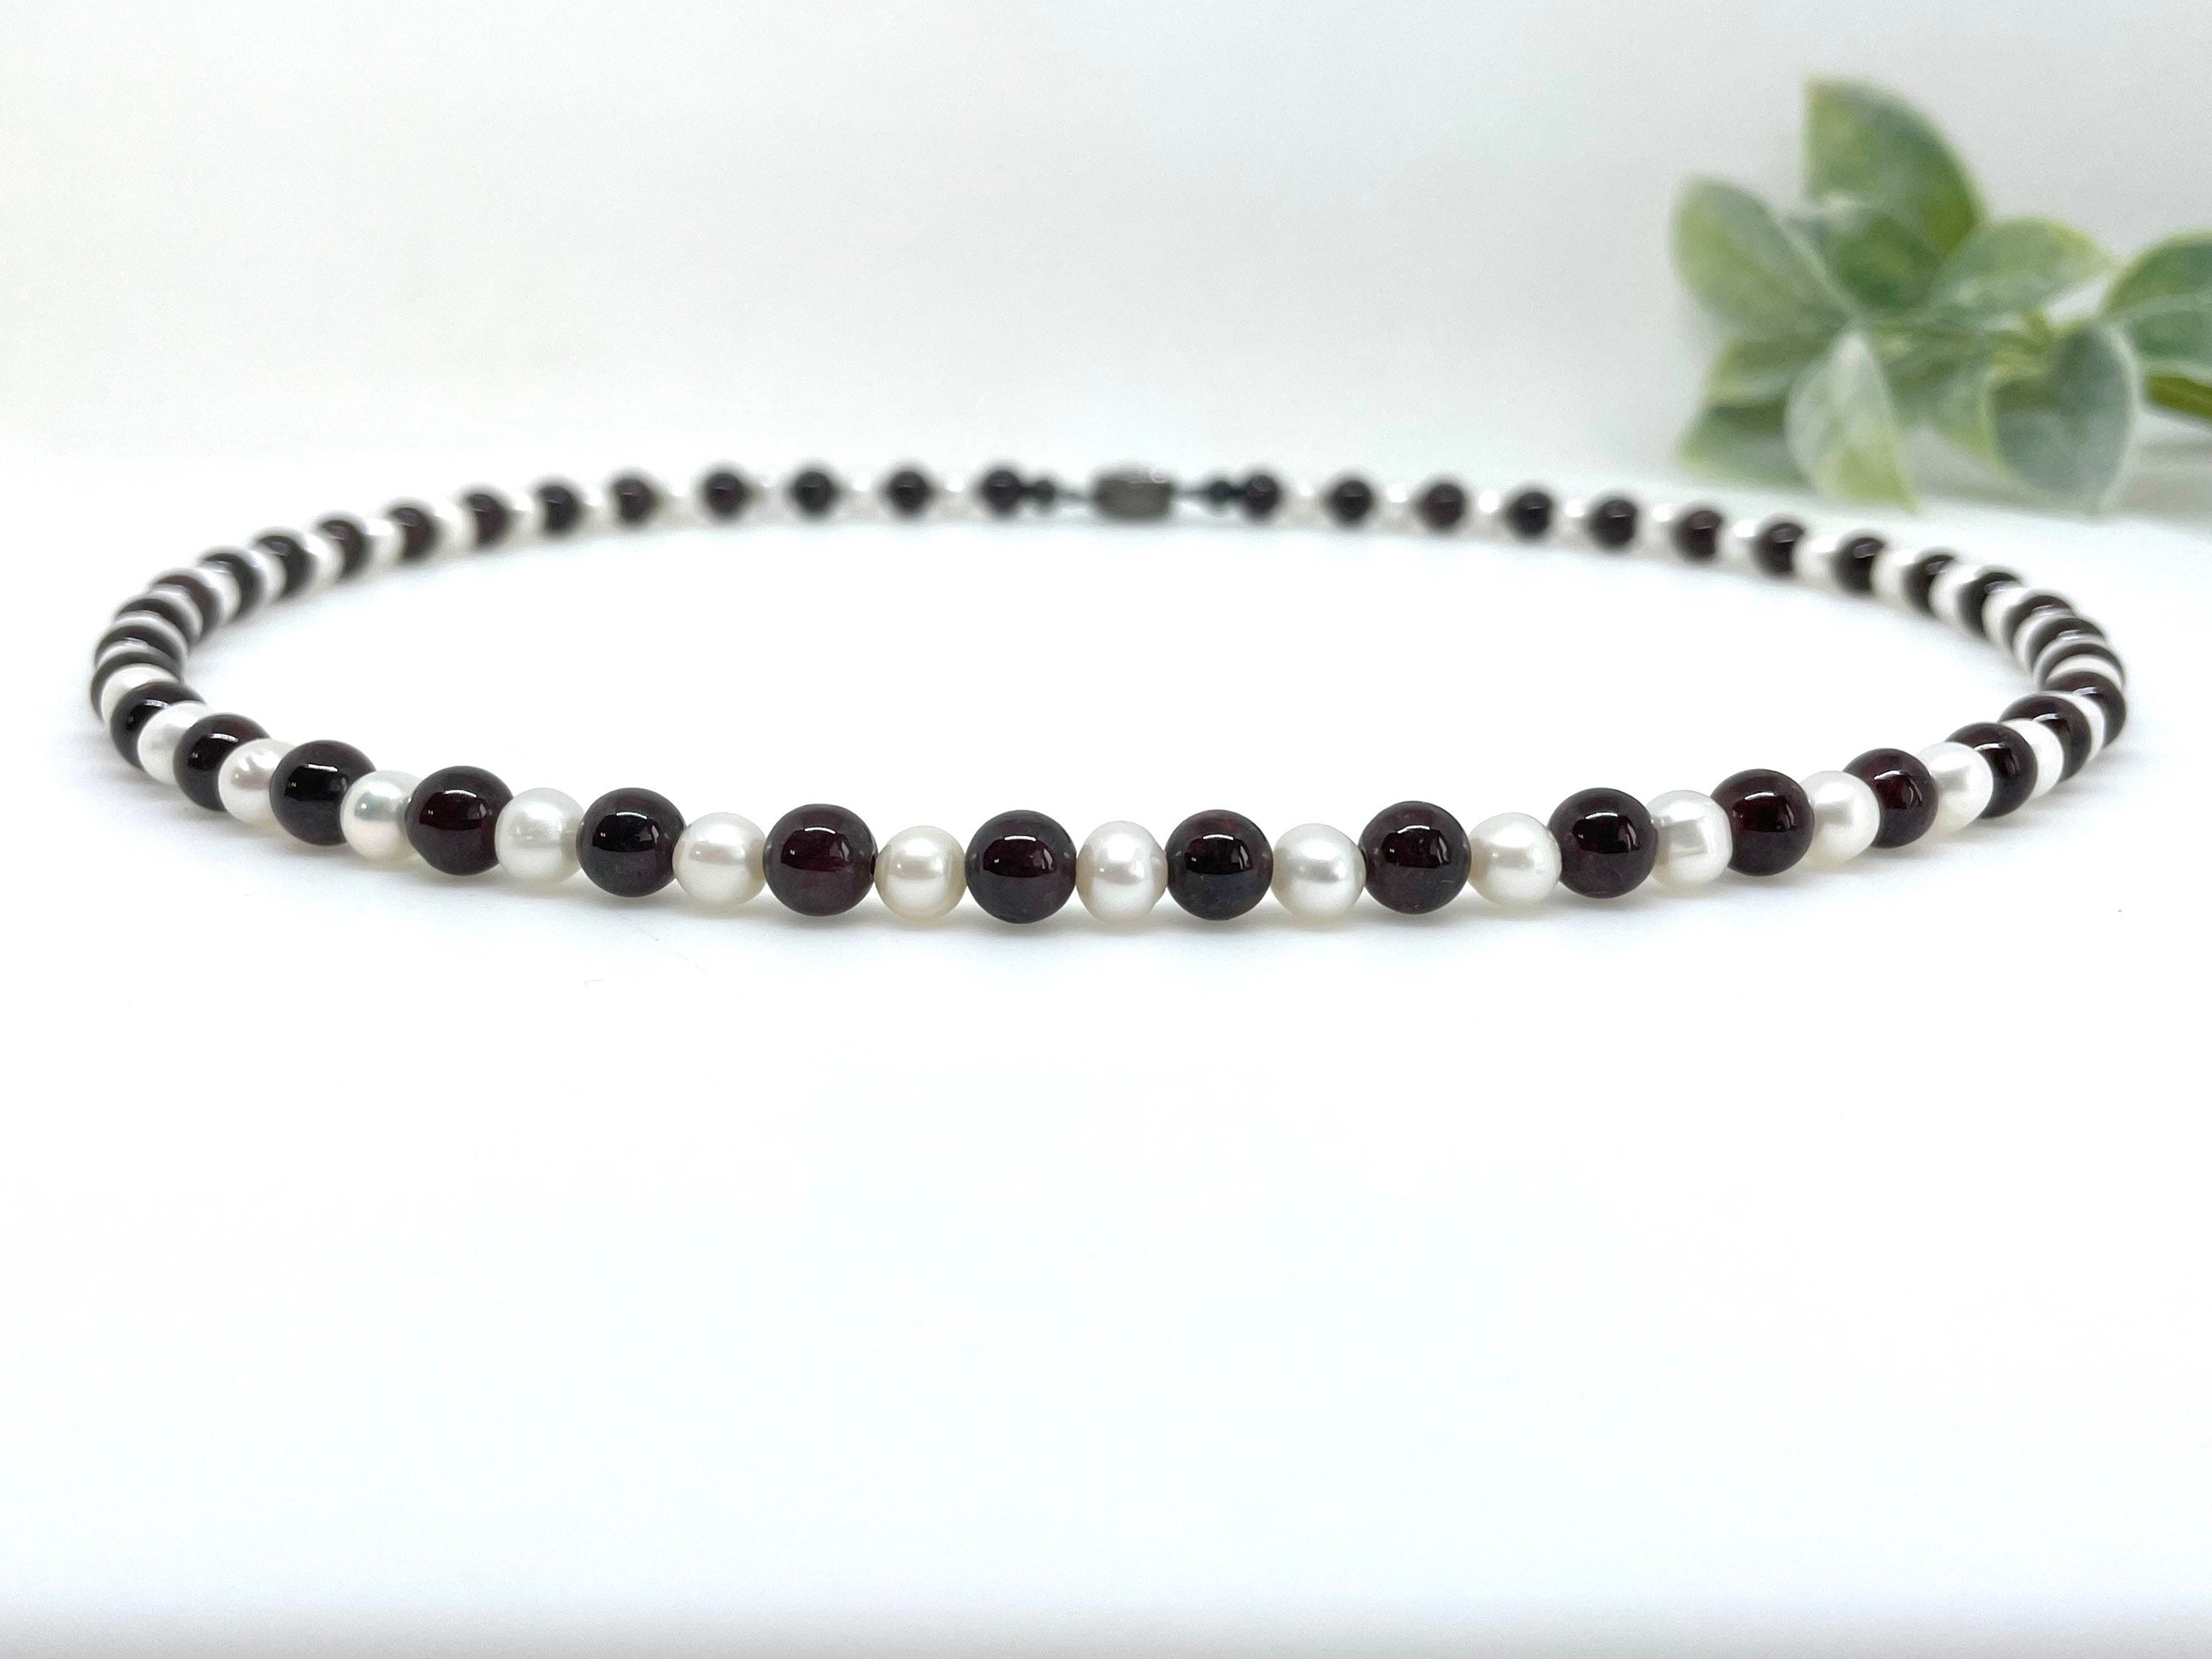 Freshwater Pearl Necklace with Garnet Stone Beads